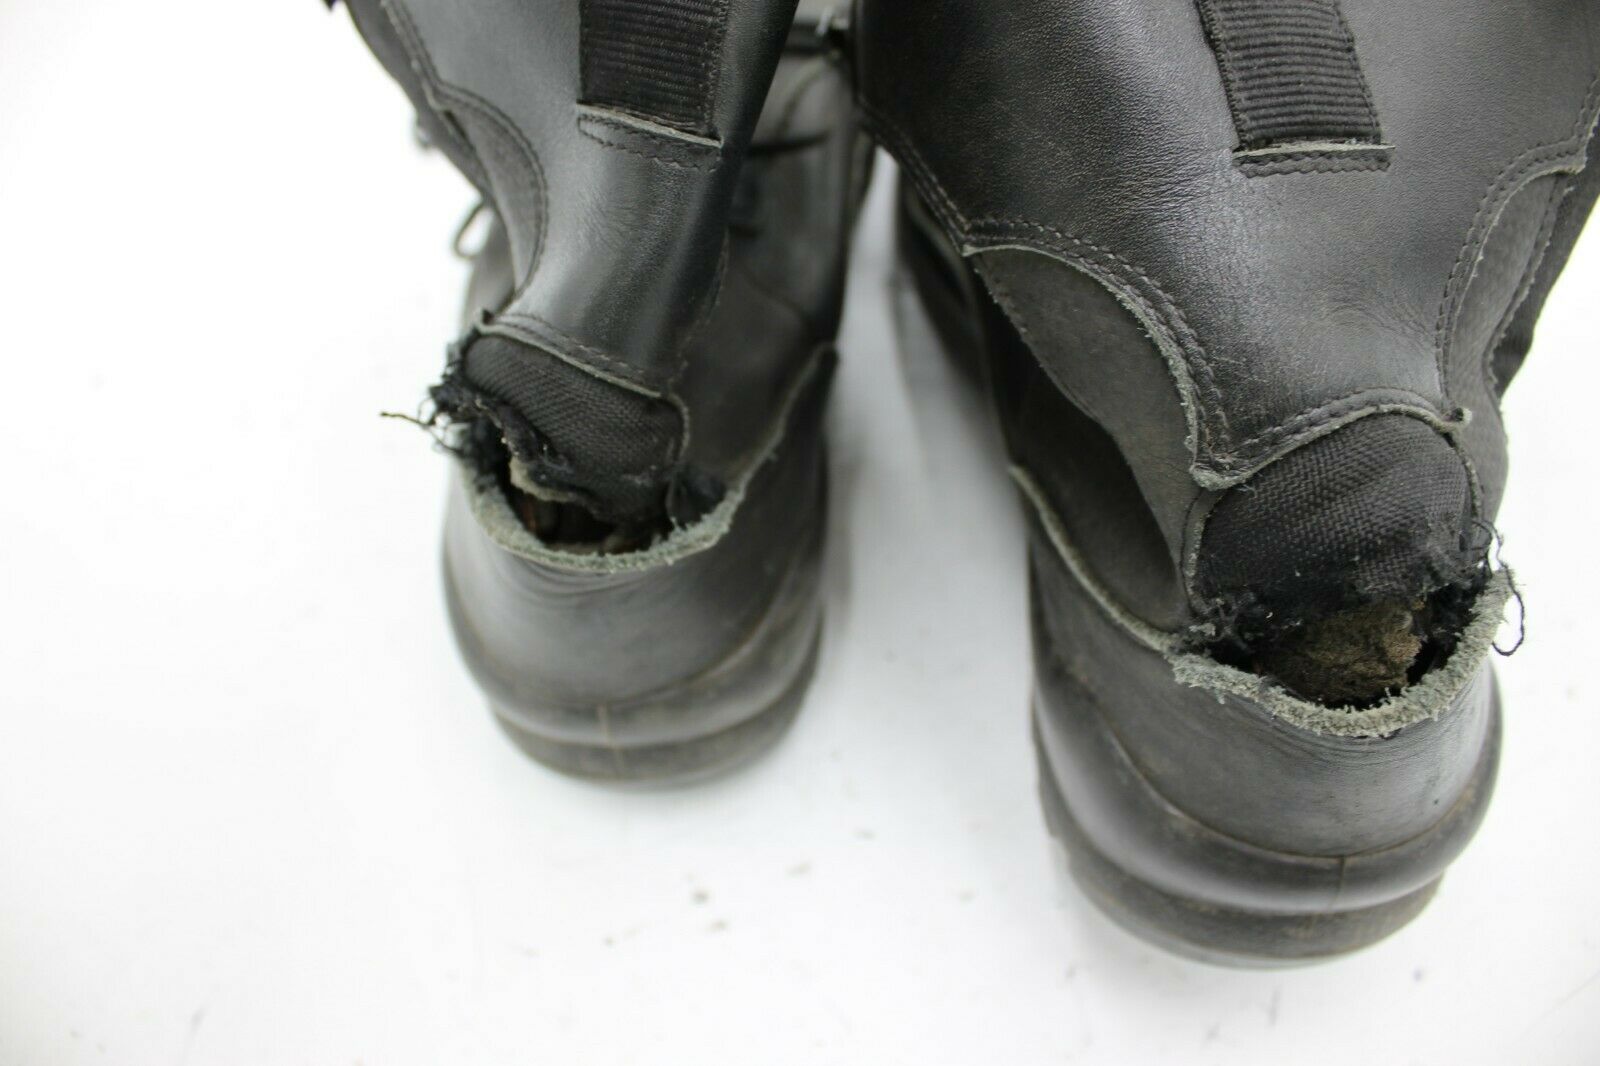 Austrian Military Jungle Combat Boots Stumpp & Baier Lightweight Used Size 10 US (ASB464310)